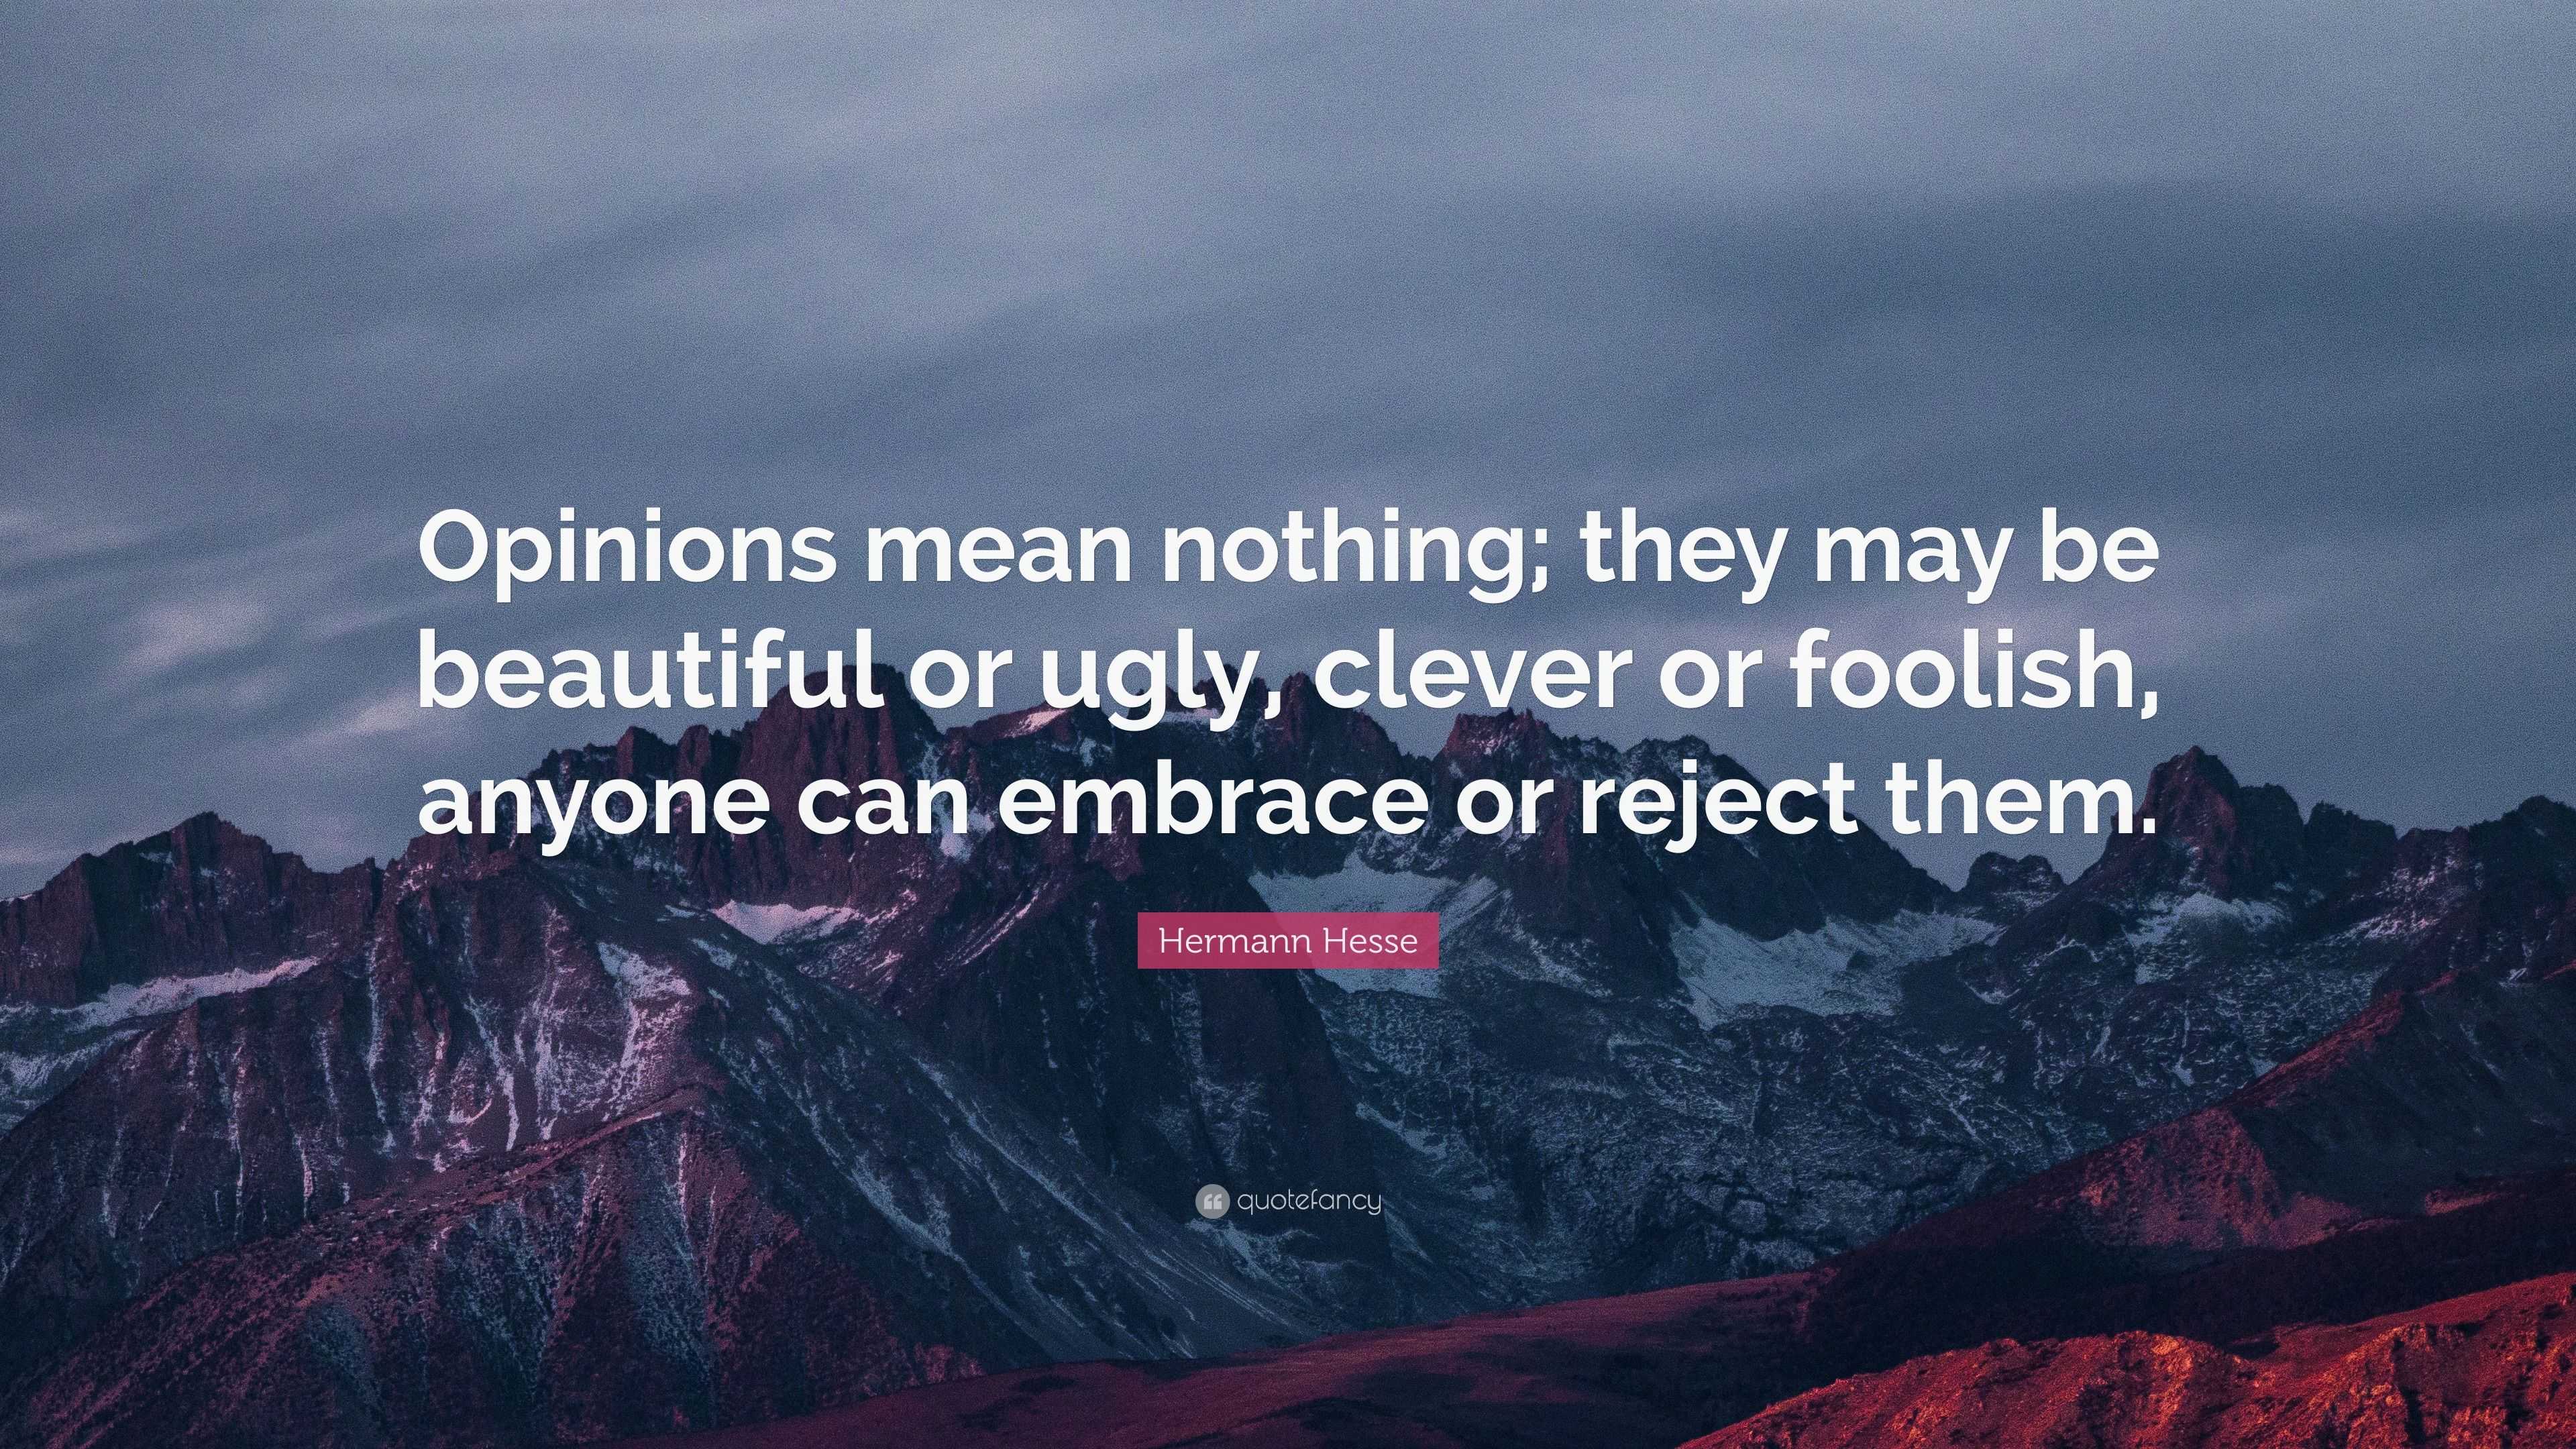 Hermann Hesse Quote: “Opinions mean nothing; they may be beautiful or ...